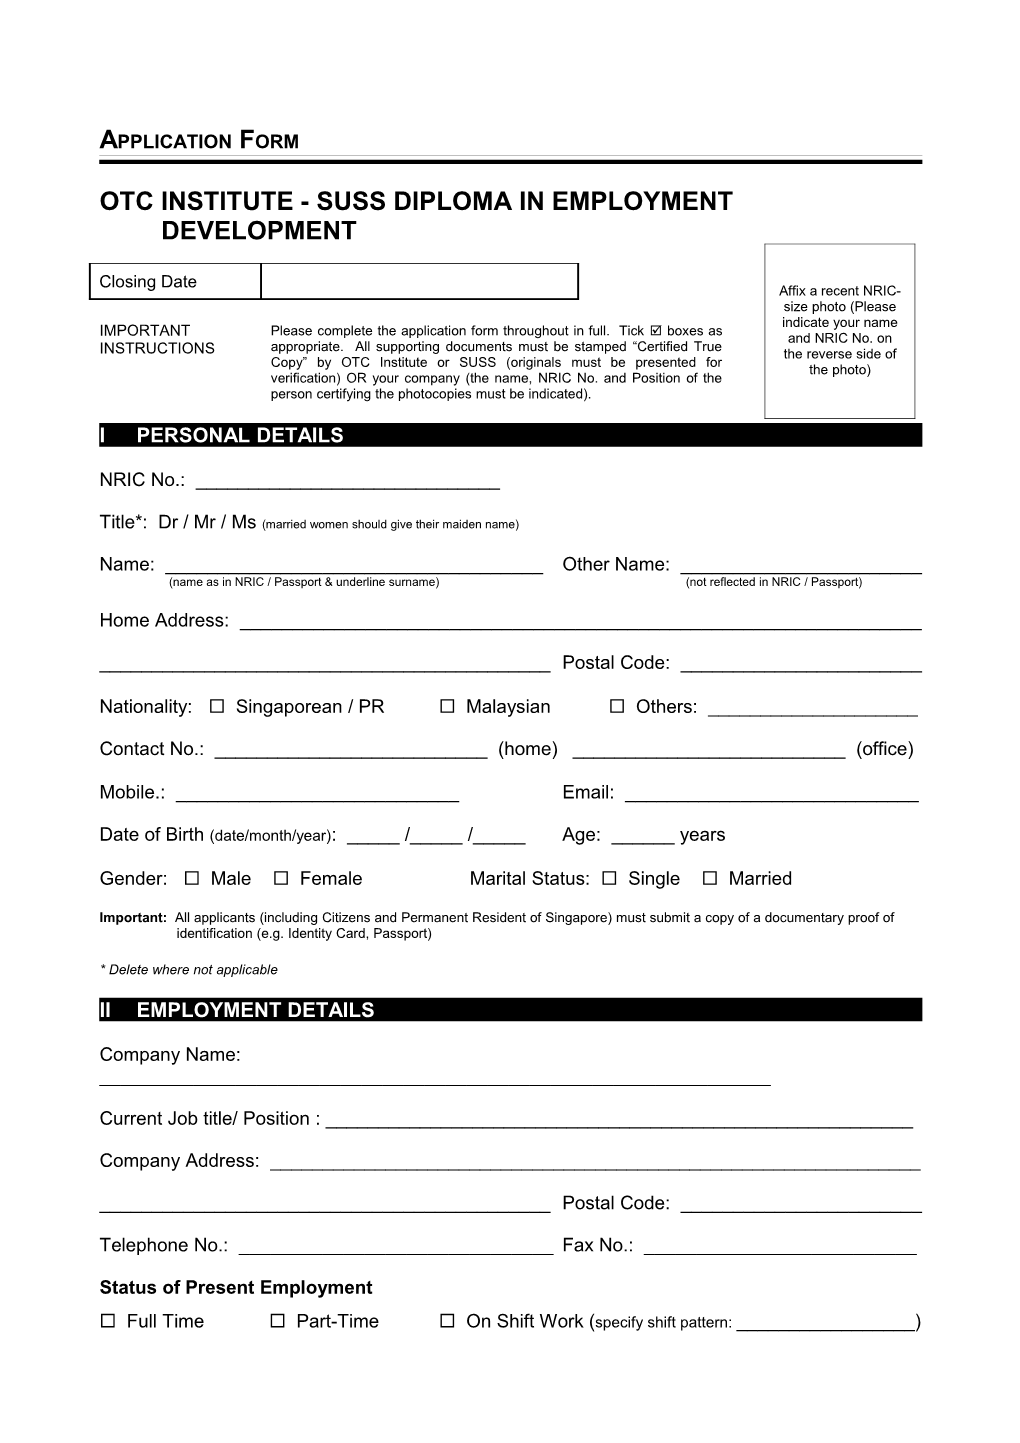 Application Form for Diploma Programme